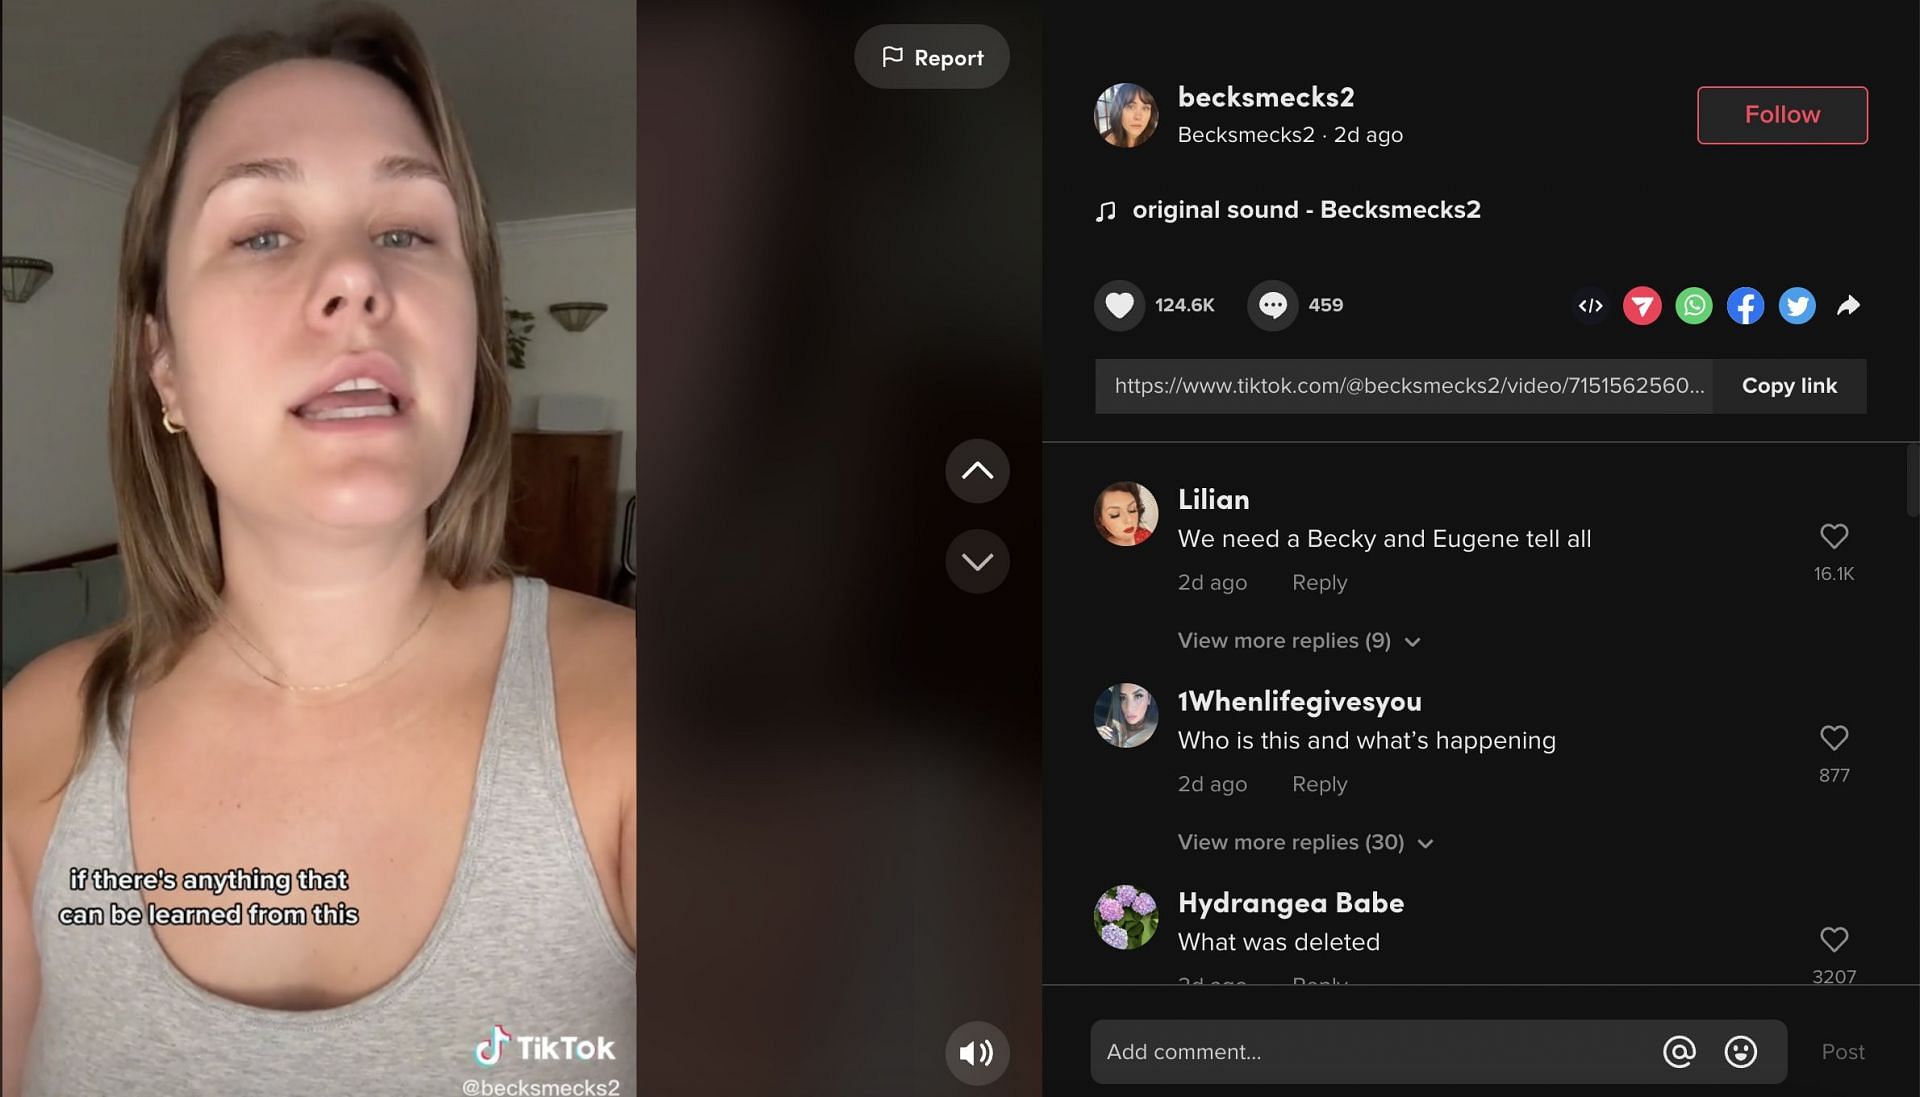 Becky confessed that the video was deleted by her, after she received a genuine apology. (Image via TikTok/becksmecks2)